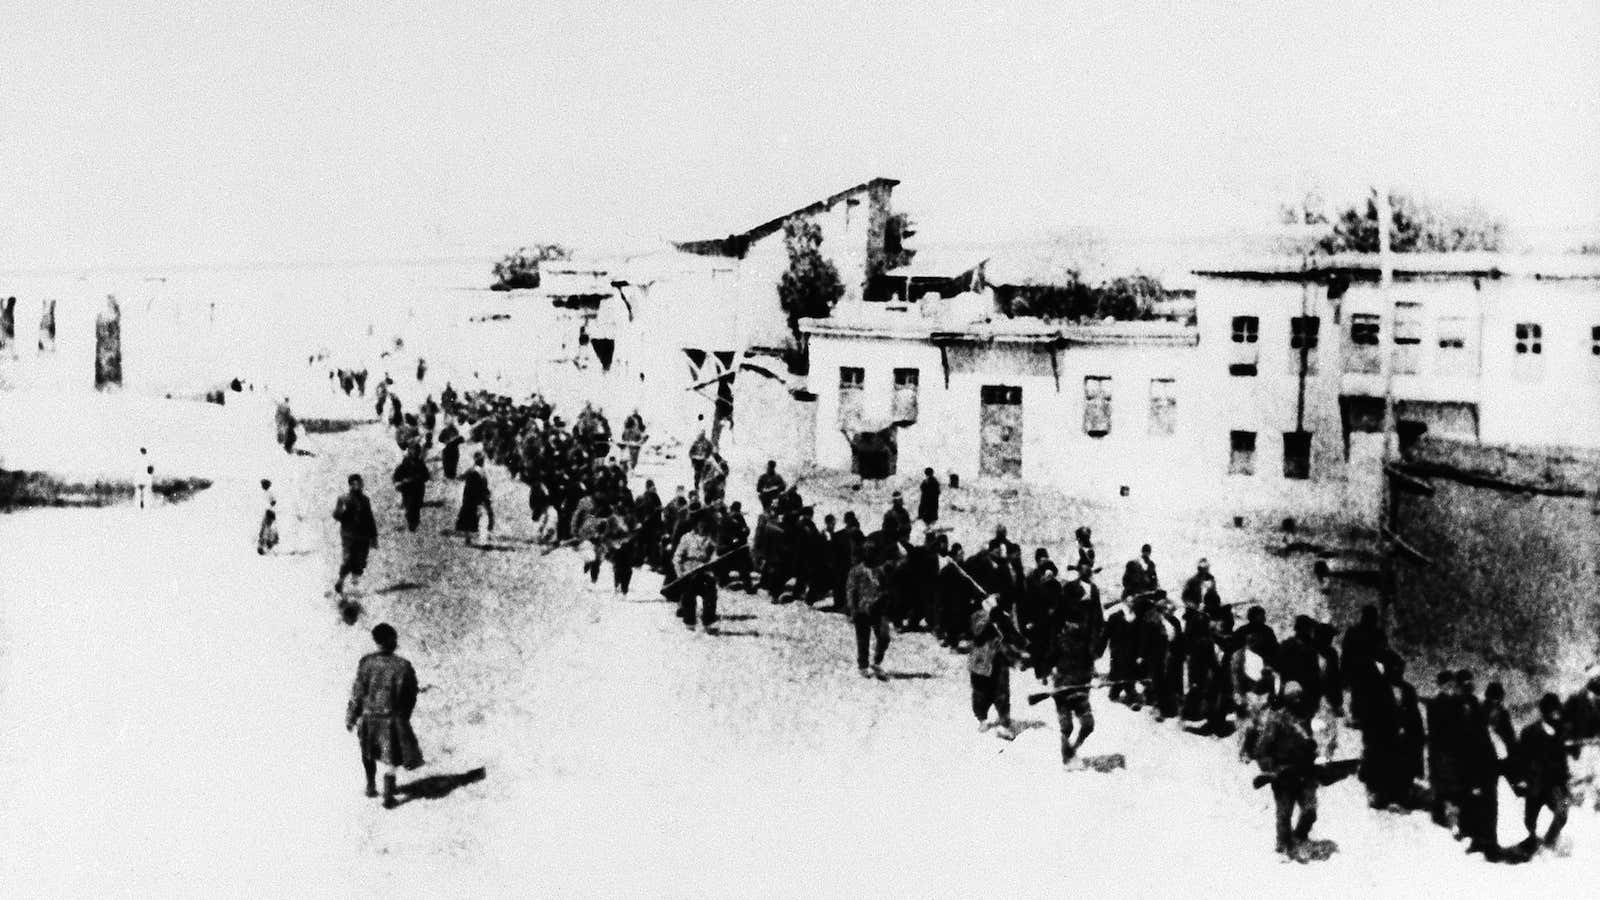 This is the scene in Turkey in 1915 when Armenians were marched long distances and said to have been massacred.